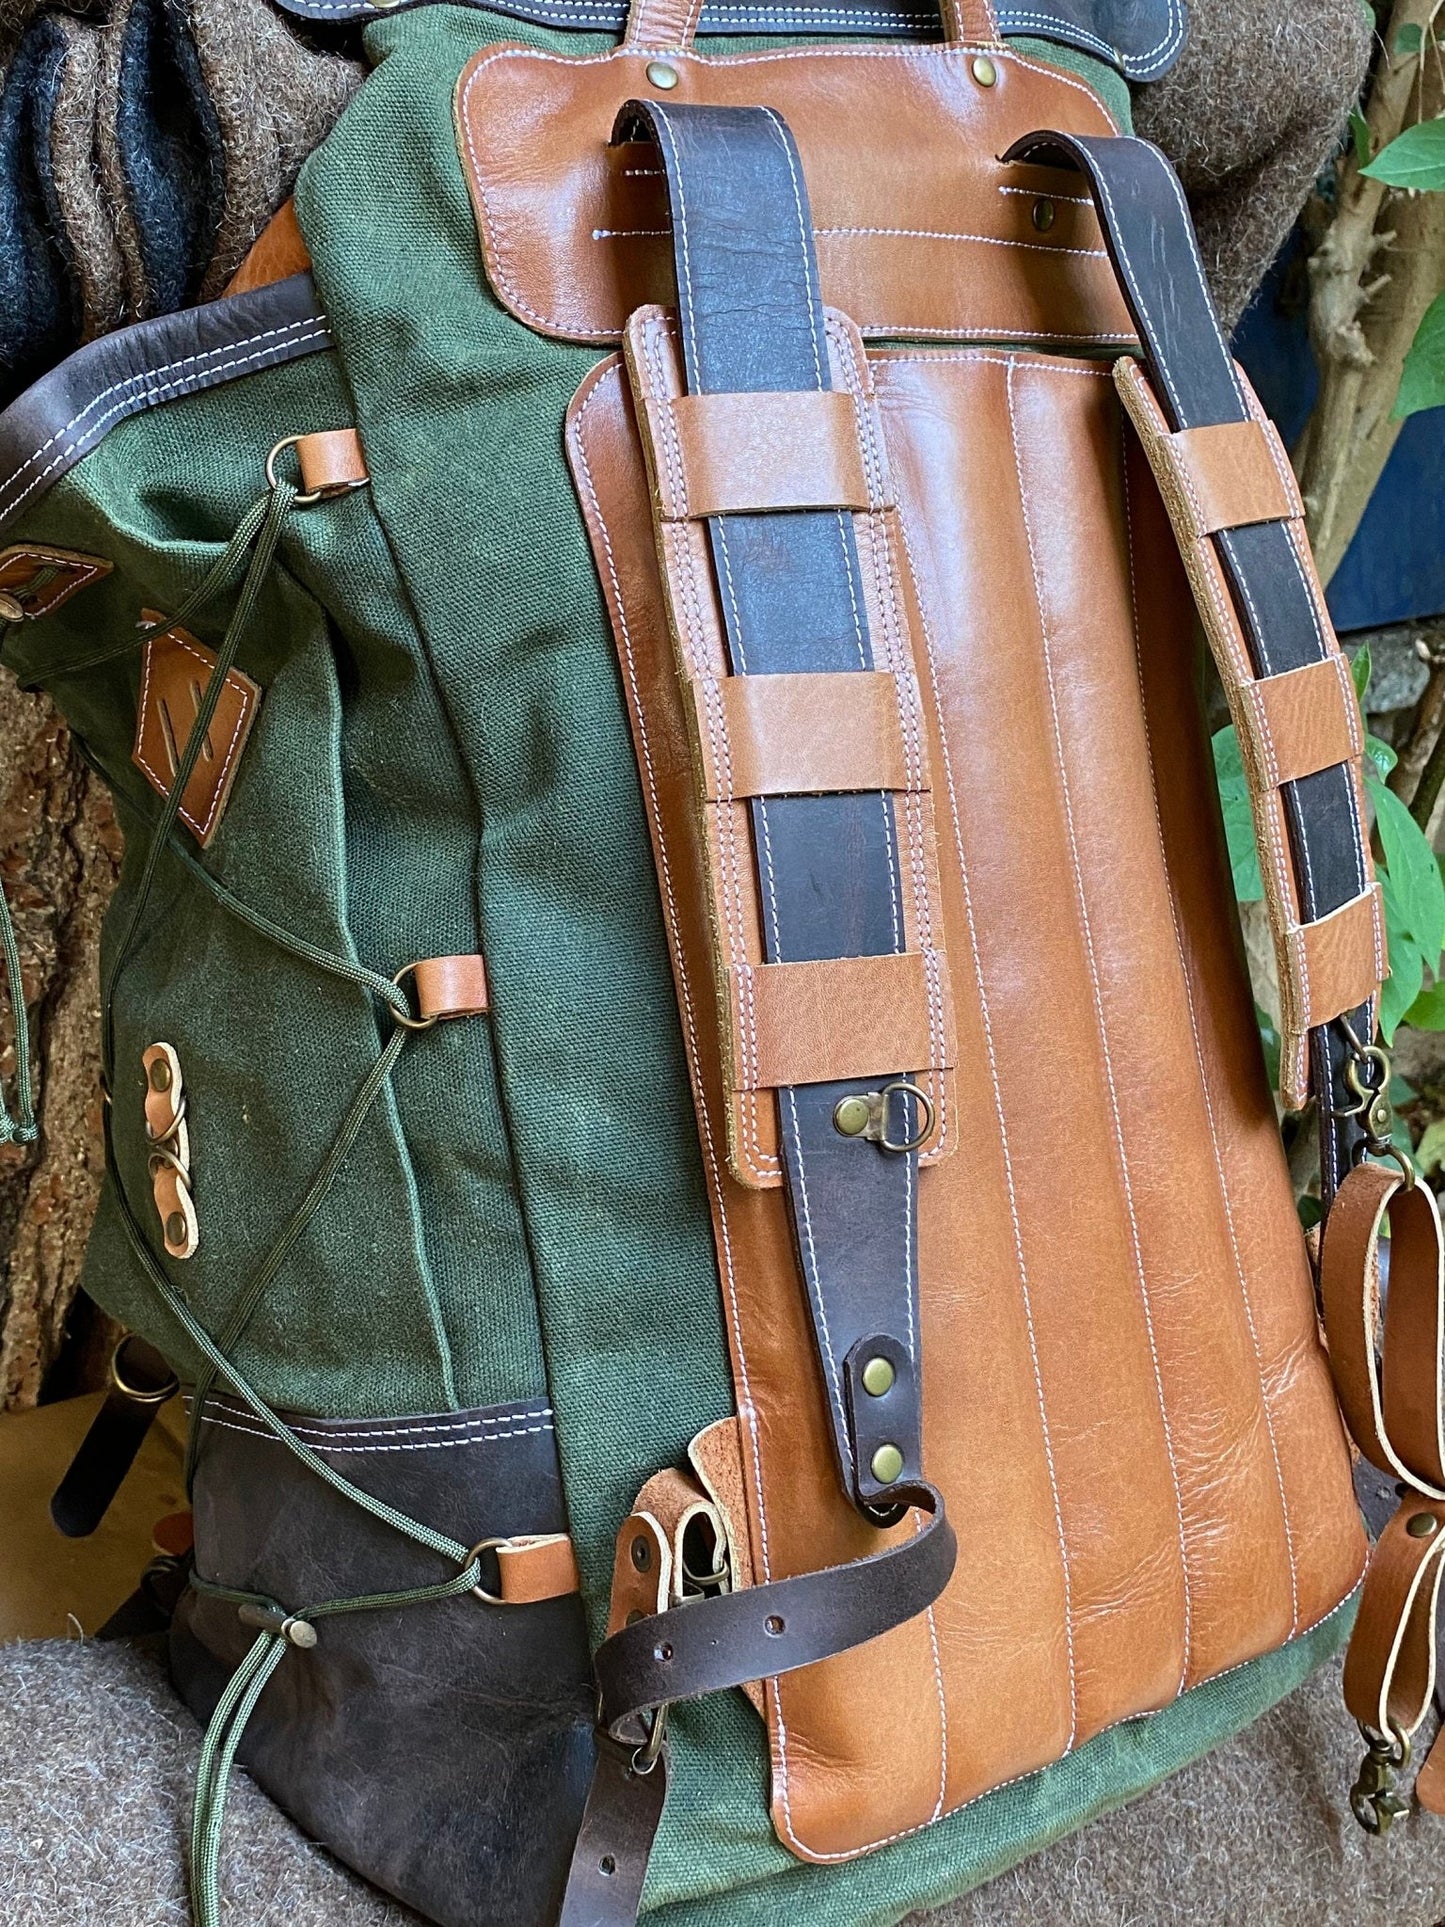 Model Name : Babylon Green | Custom Leather-Canvas Backpack with Leather Flap, You can Redesign-Customize the item | 30 Liter to 80 Liter Options (Many variants Photos) bushcraft - camping - hiking backpack 99percenthandmade   